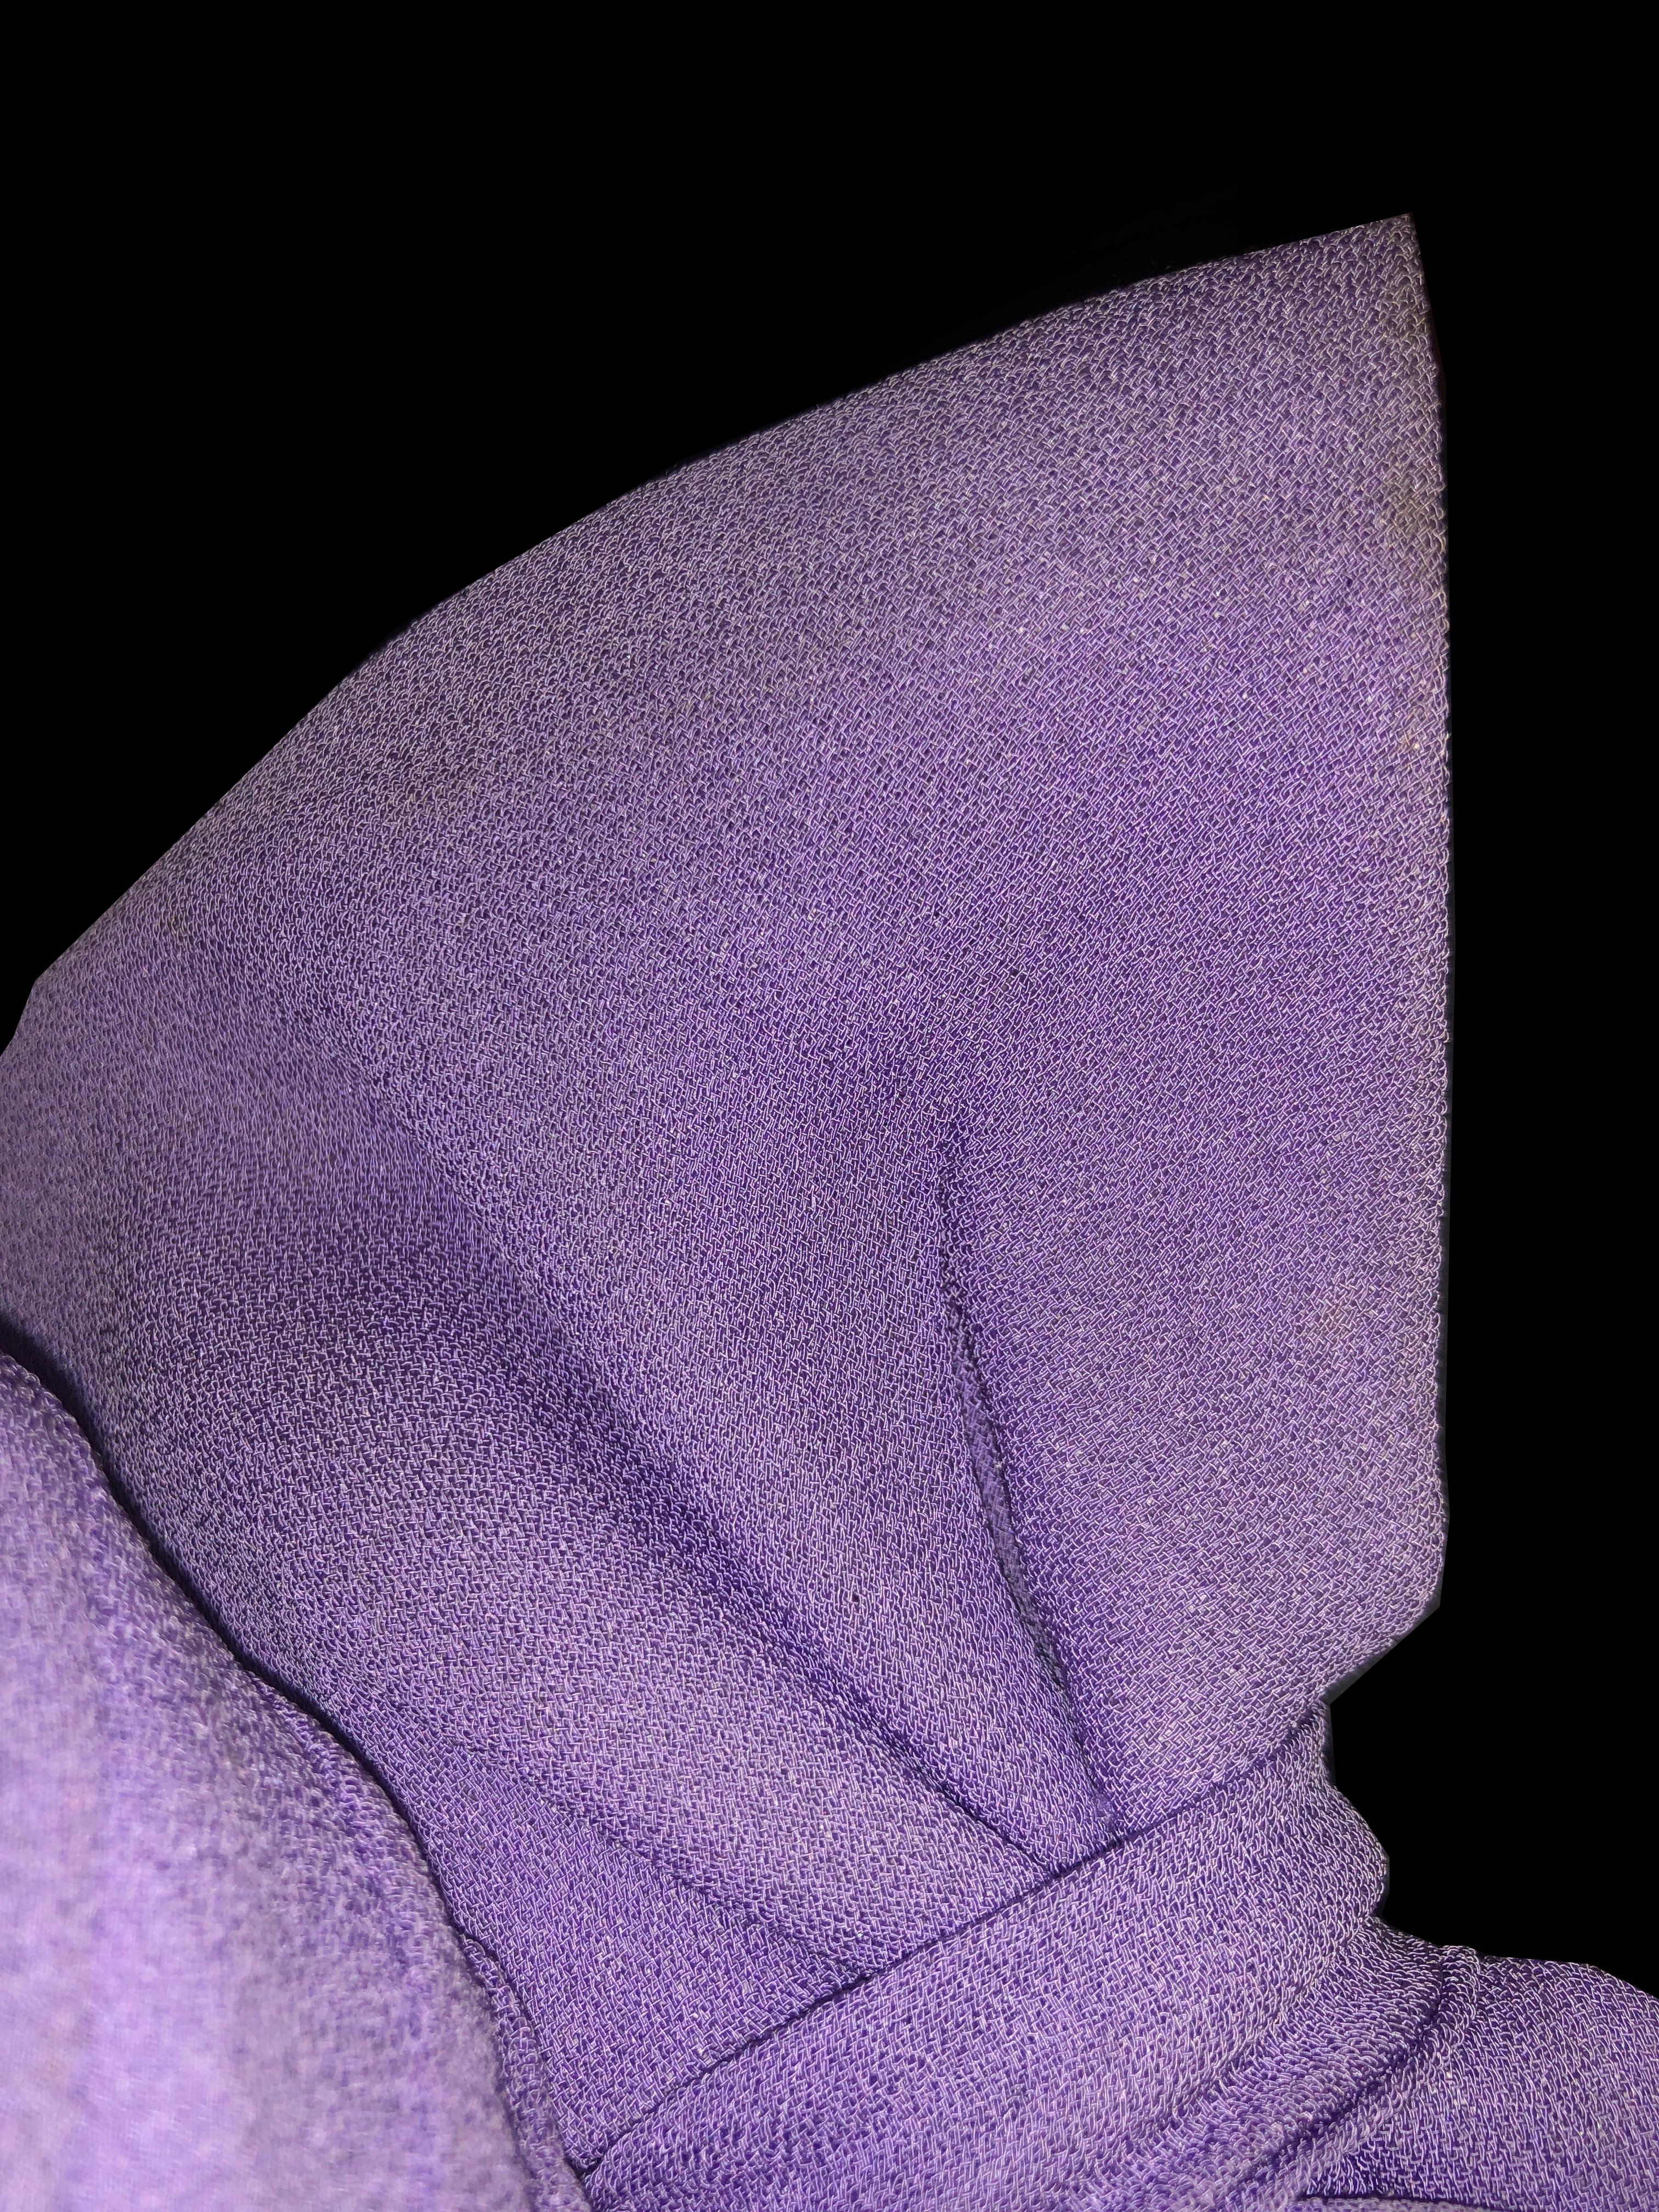 1930s Lavender Crepe Turban with Matching Bows 1